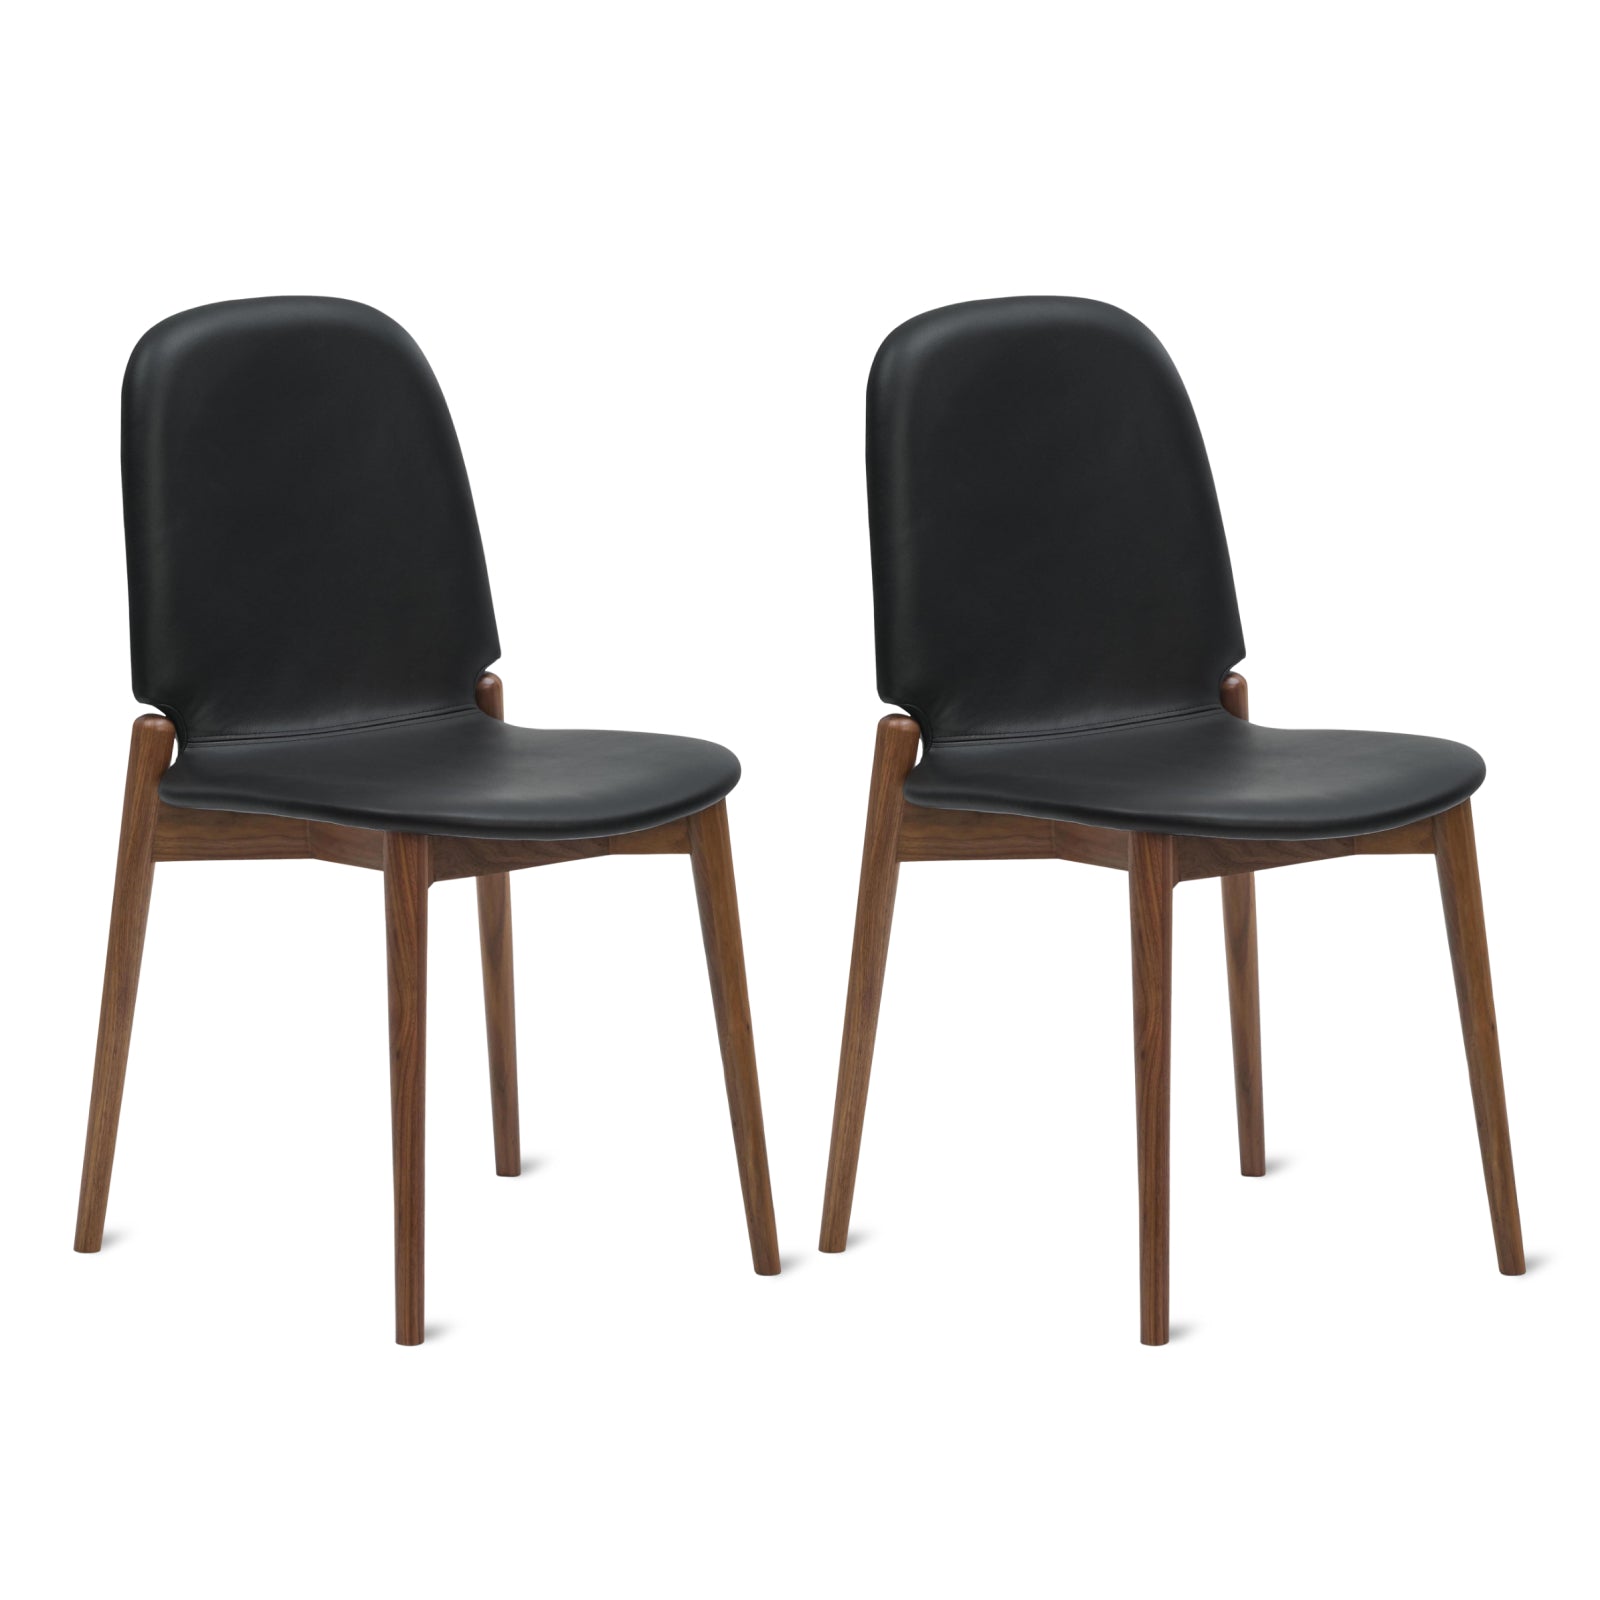 Dine In Dining Chair (Set of Two), Walnut/Black Leather - Image 9